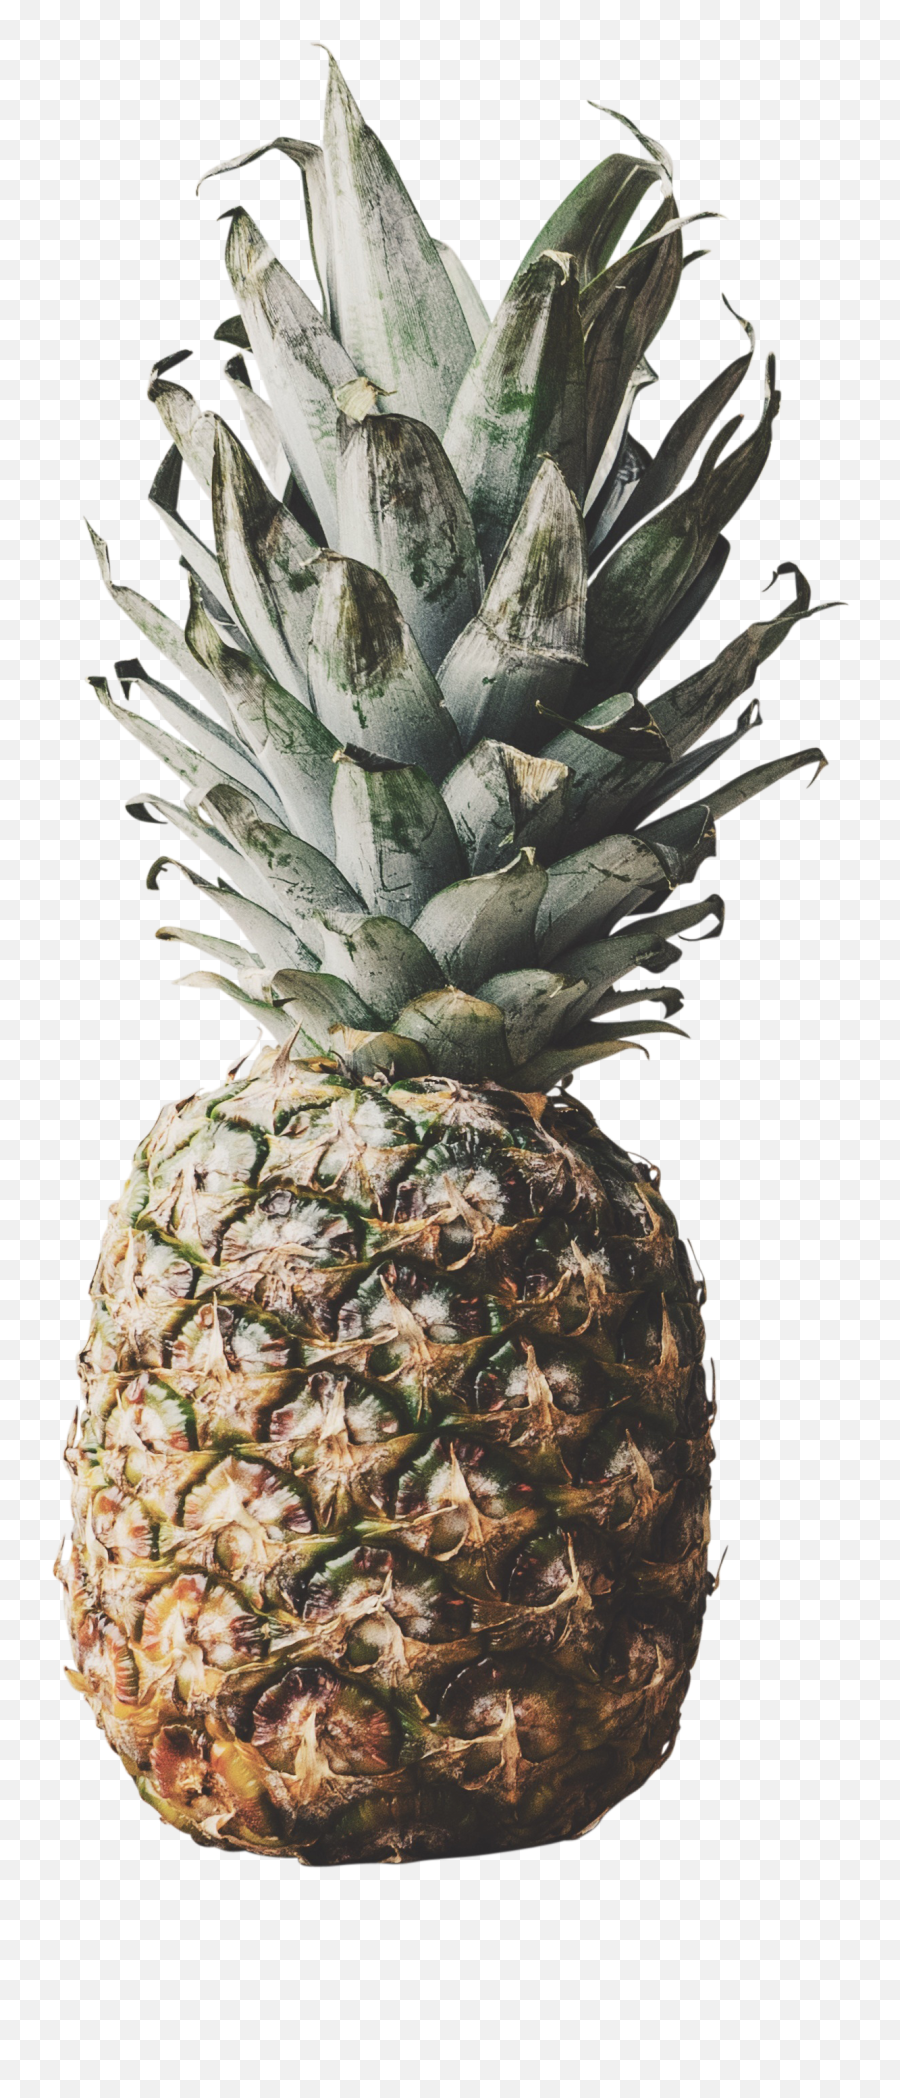 Png Images Premium Collection - Pineapple,Pineapples Png